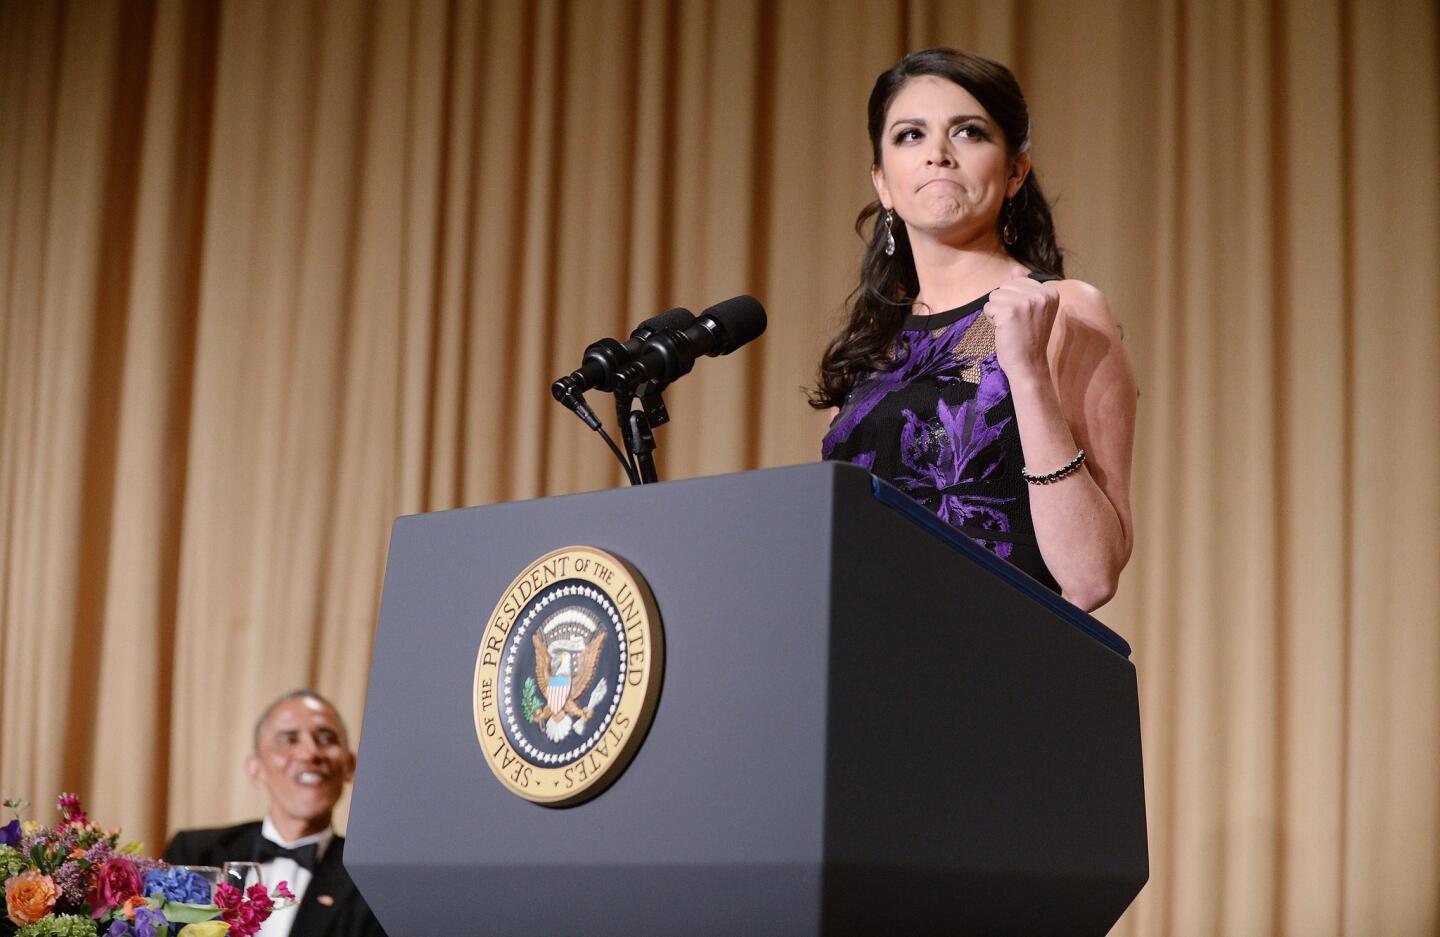 "Saturday Night Live" comedian Cecily Strong speaks as President Obama looks on during the annual White House Correspondents' Assn. Gala at the Washington Hilton hotel on Saturday.